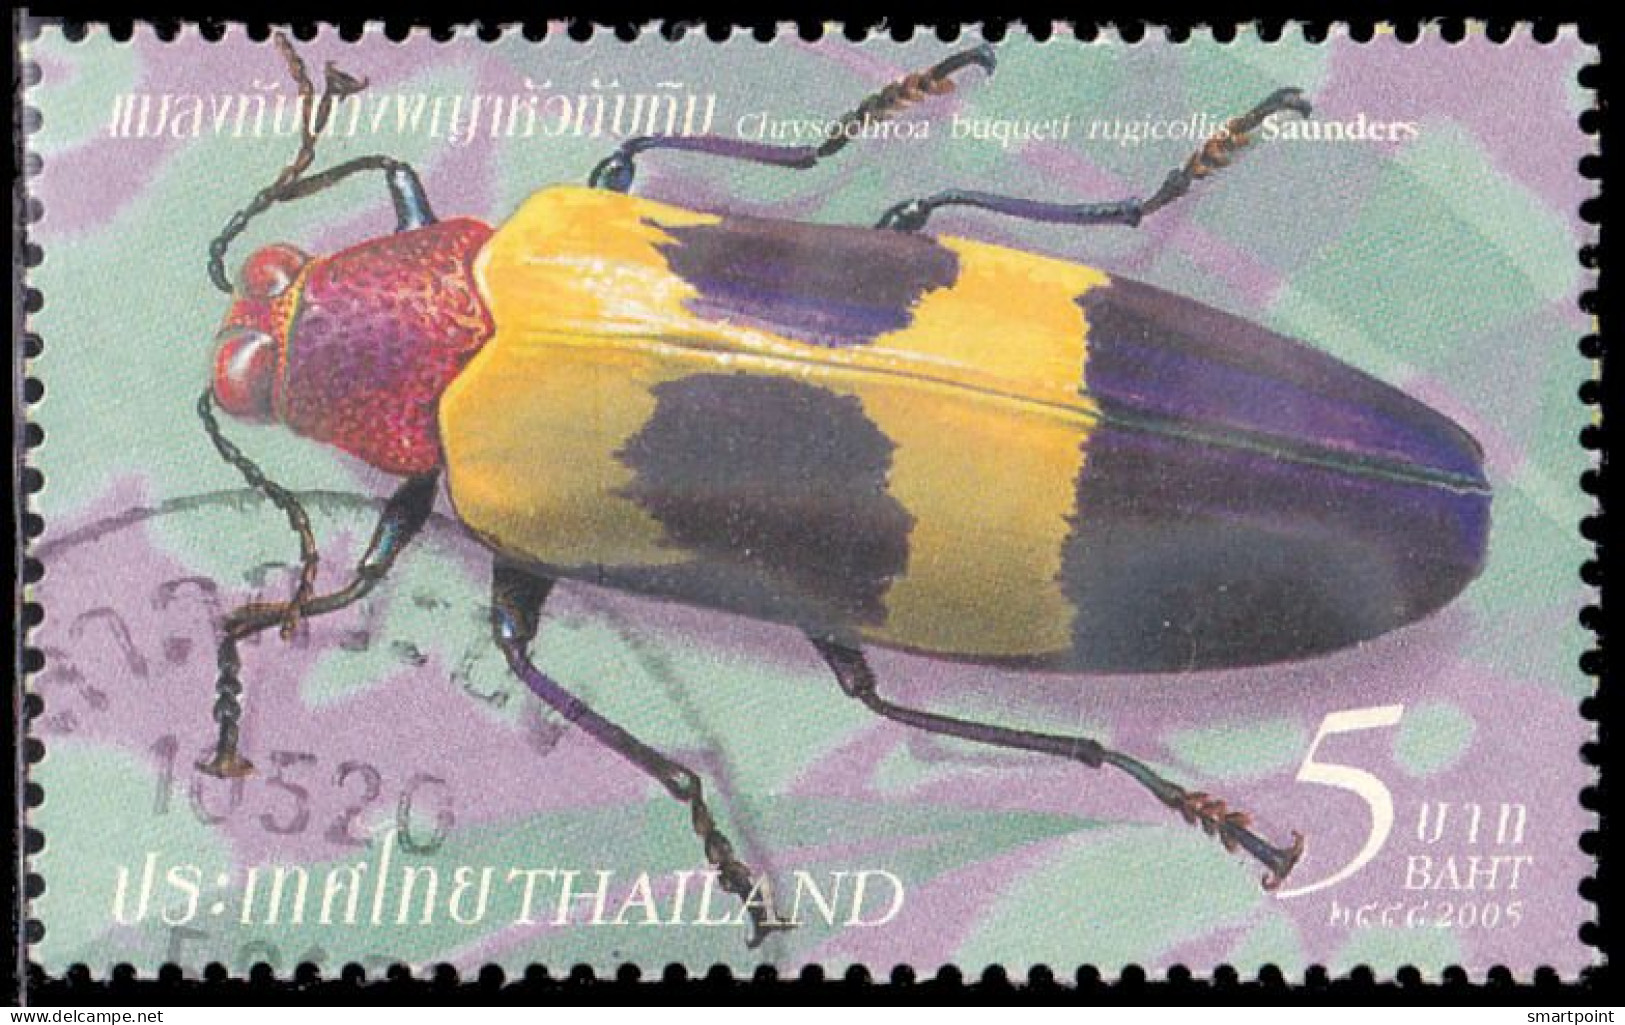 Thailand Stamp 2005 Insects (3rd Series) 5 Baht - Used - Thailand